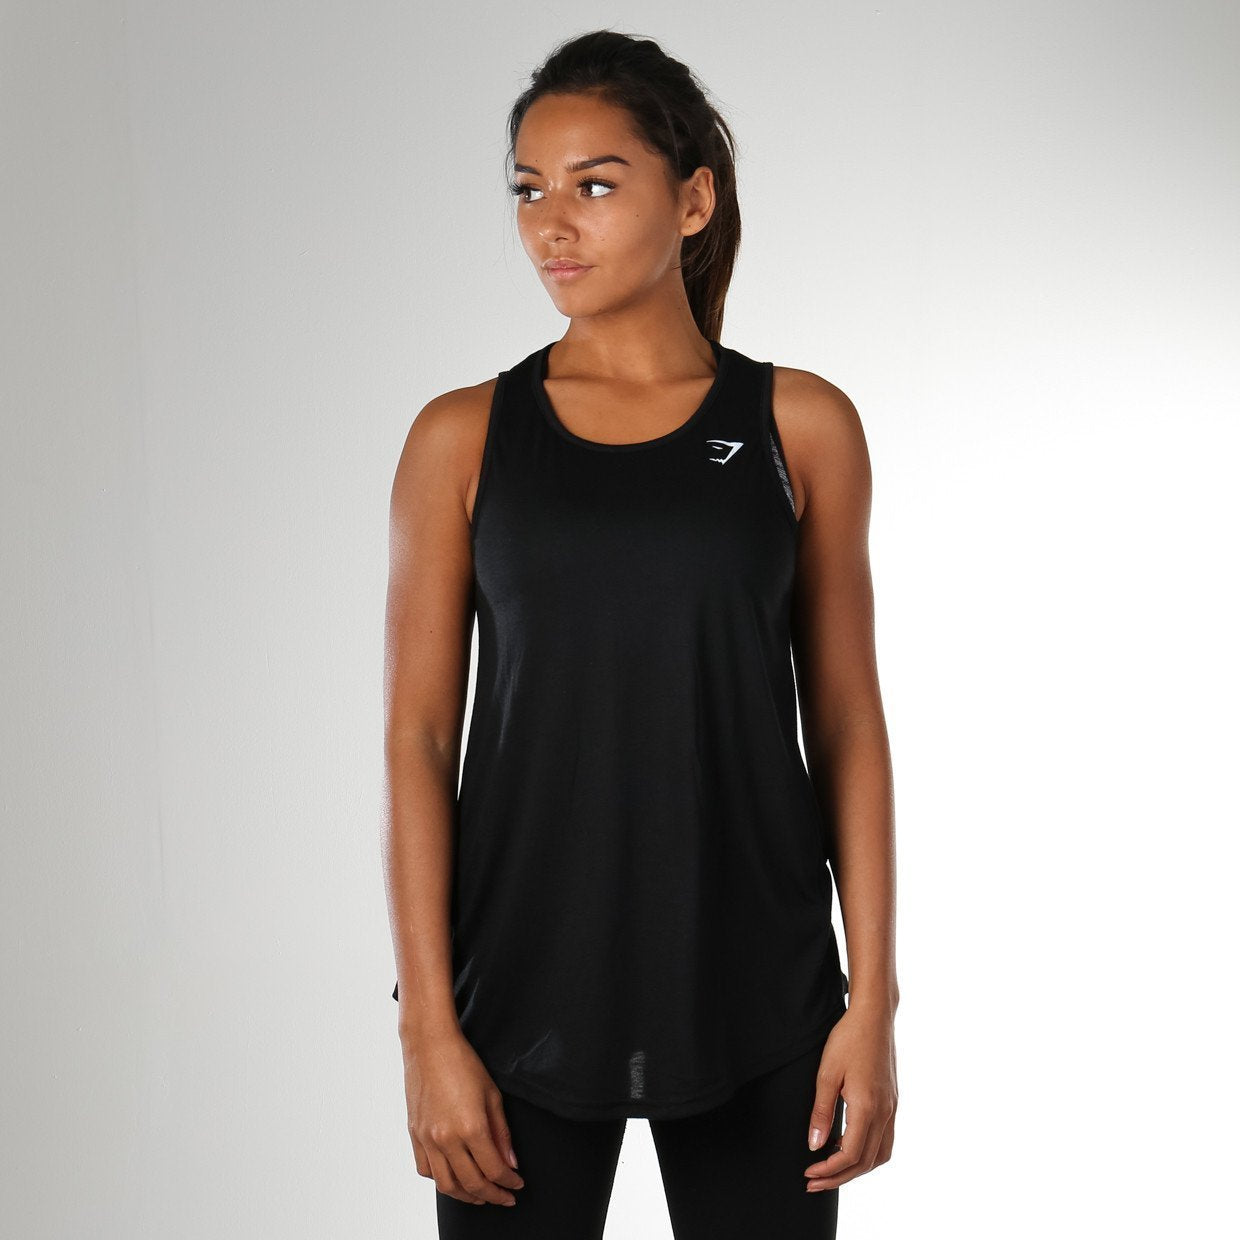 Freestyle Vest in Black - view 1